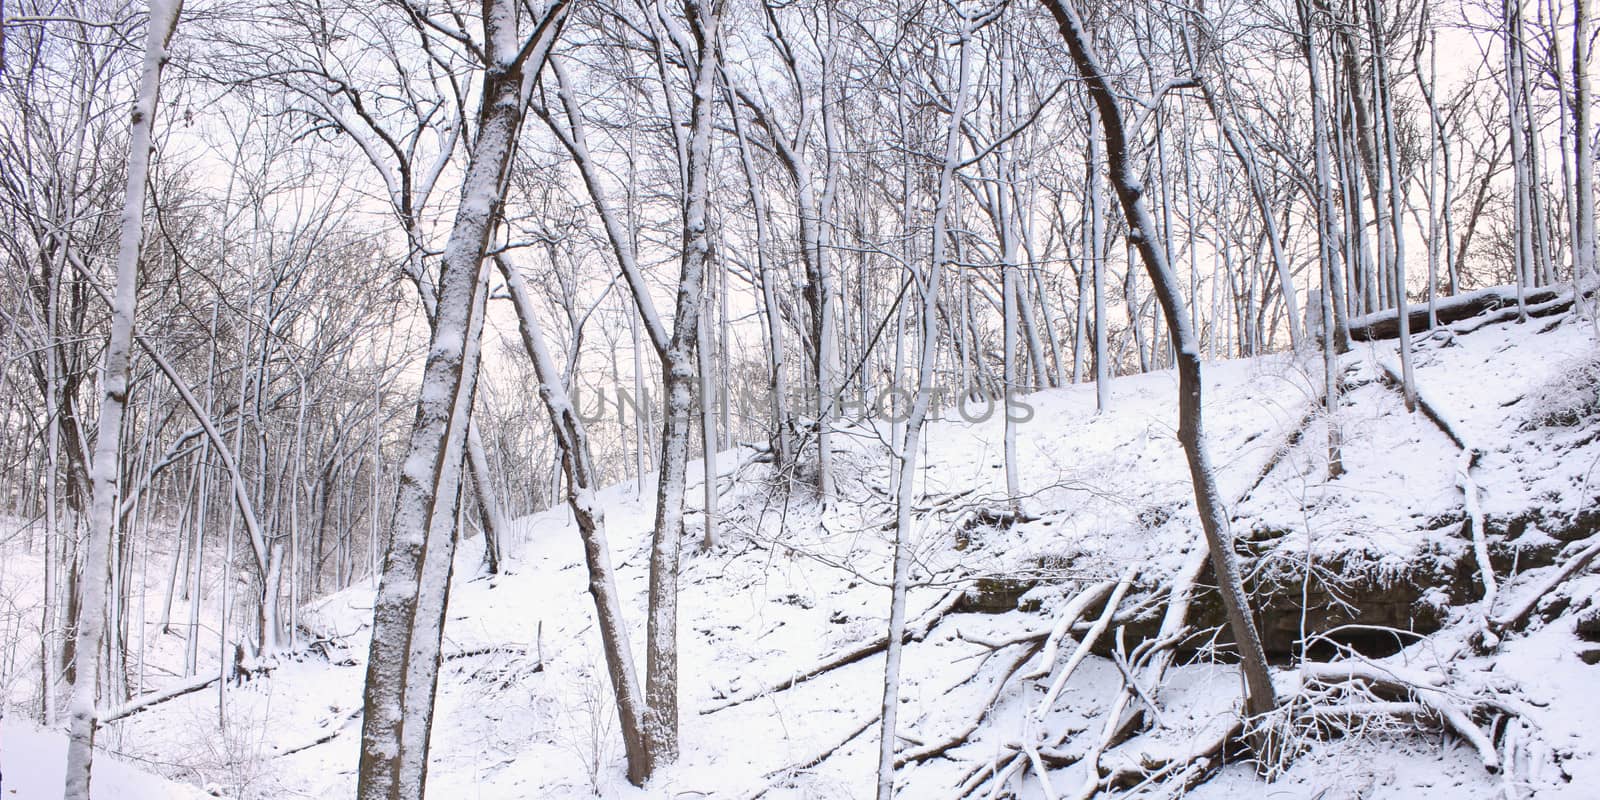 Snowy Forest Scenery Illinois by Wirepec